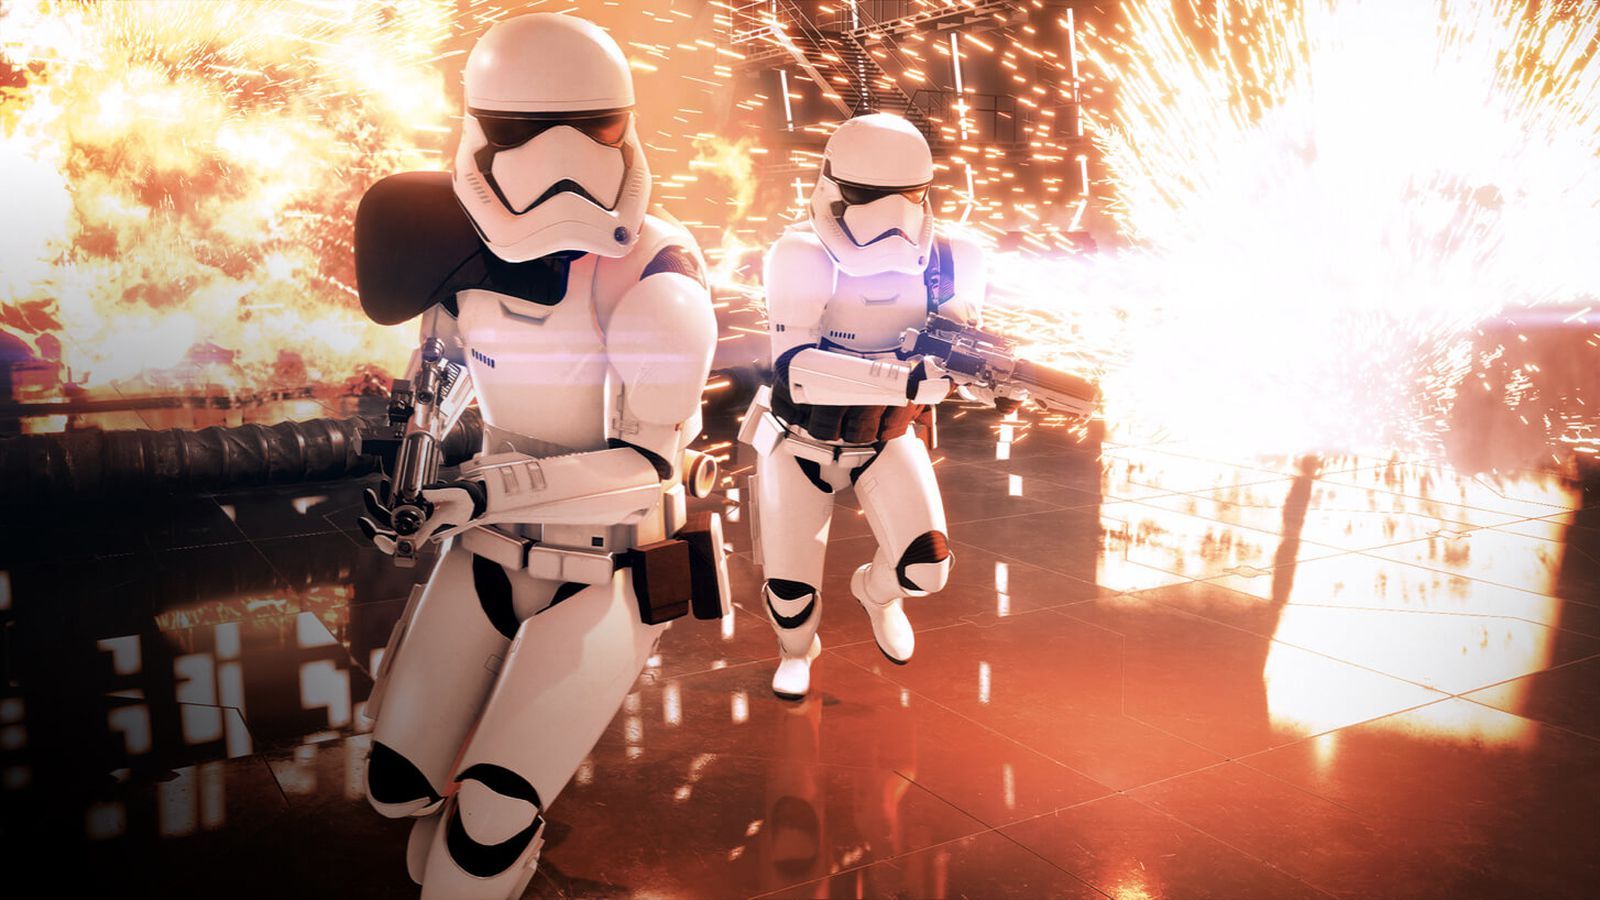 What's new in Star Wars Battlefront 2's multiplayer